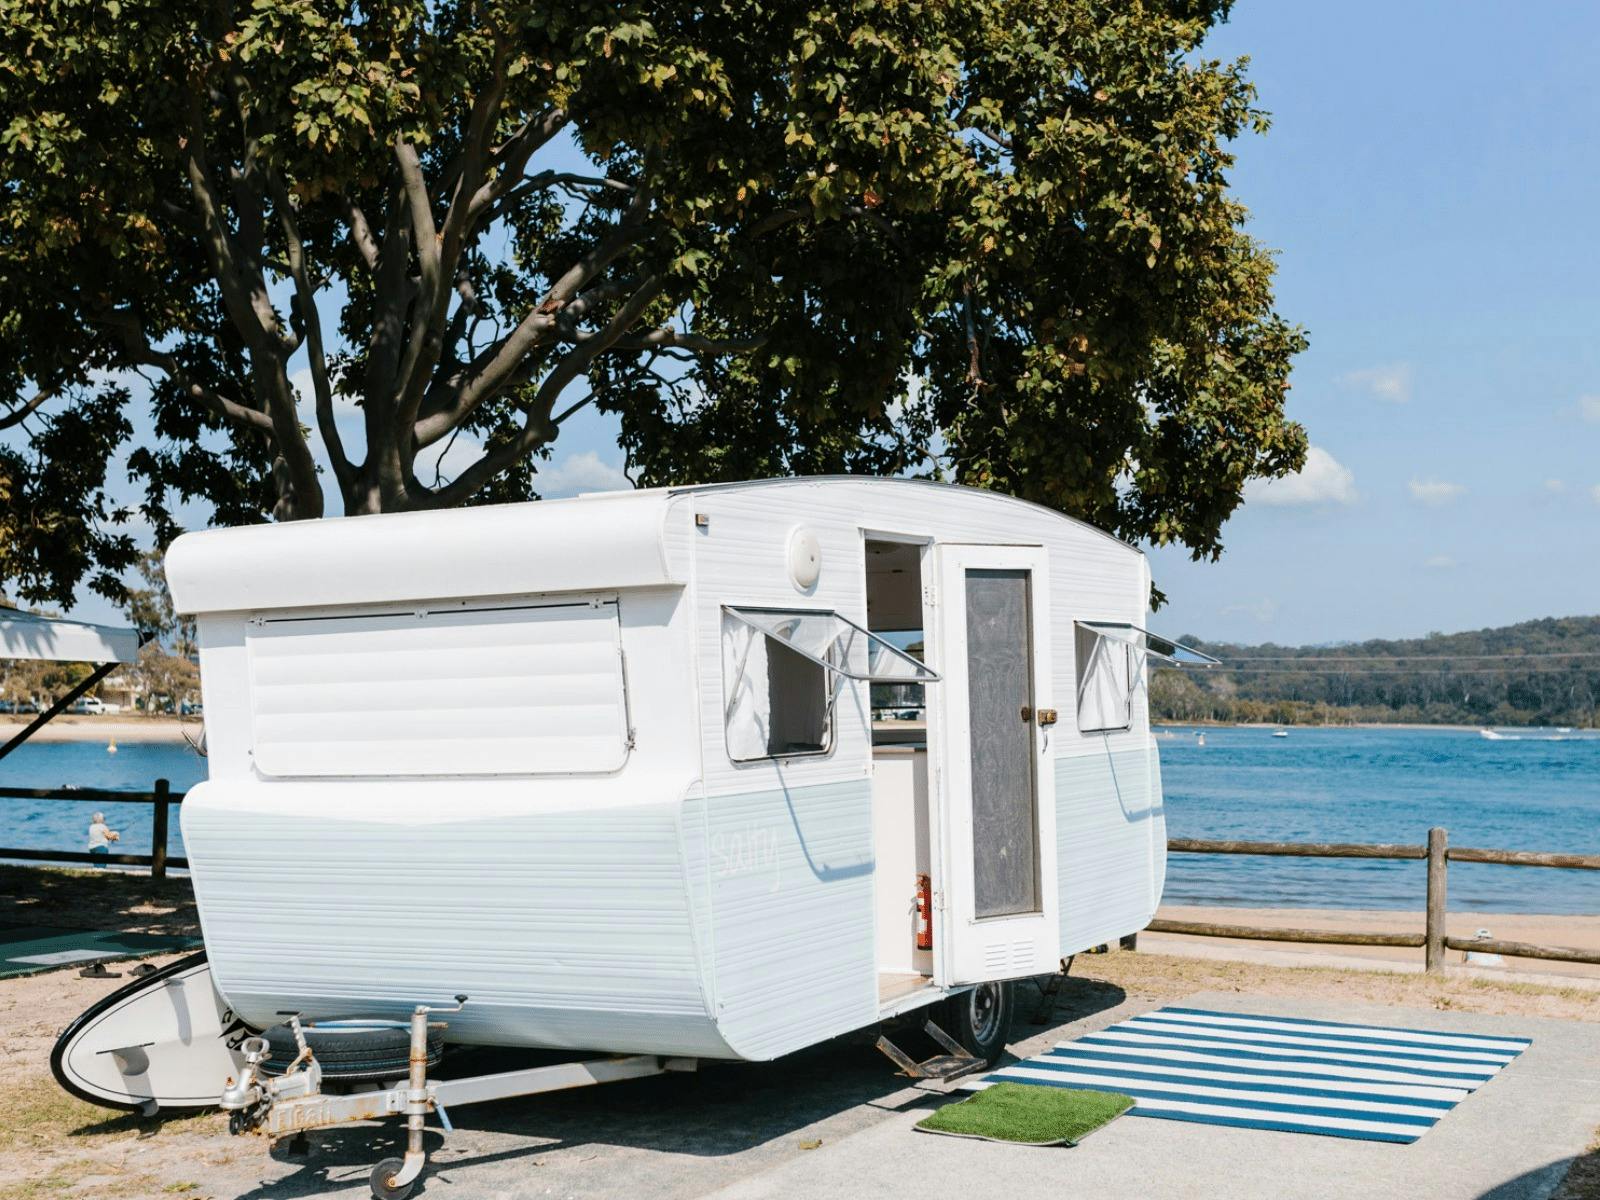 Cute and quirky vintage caravan in front of lake in Queensland